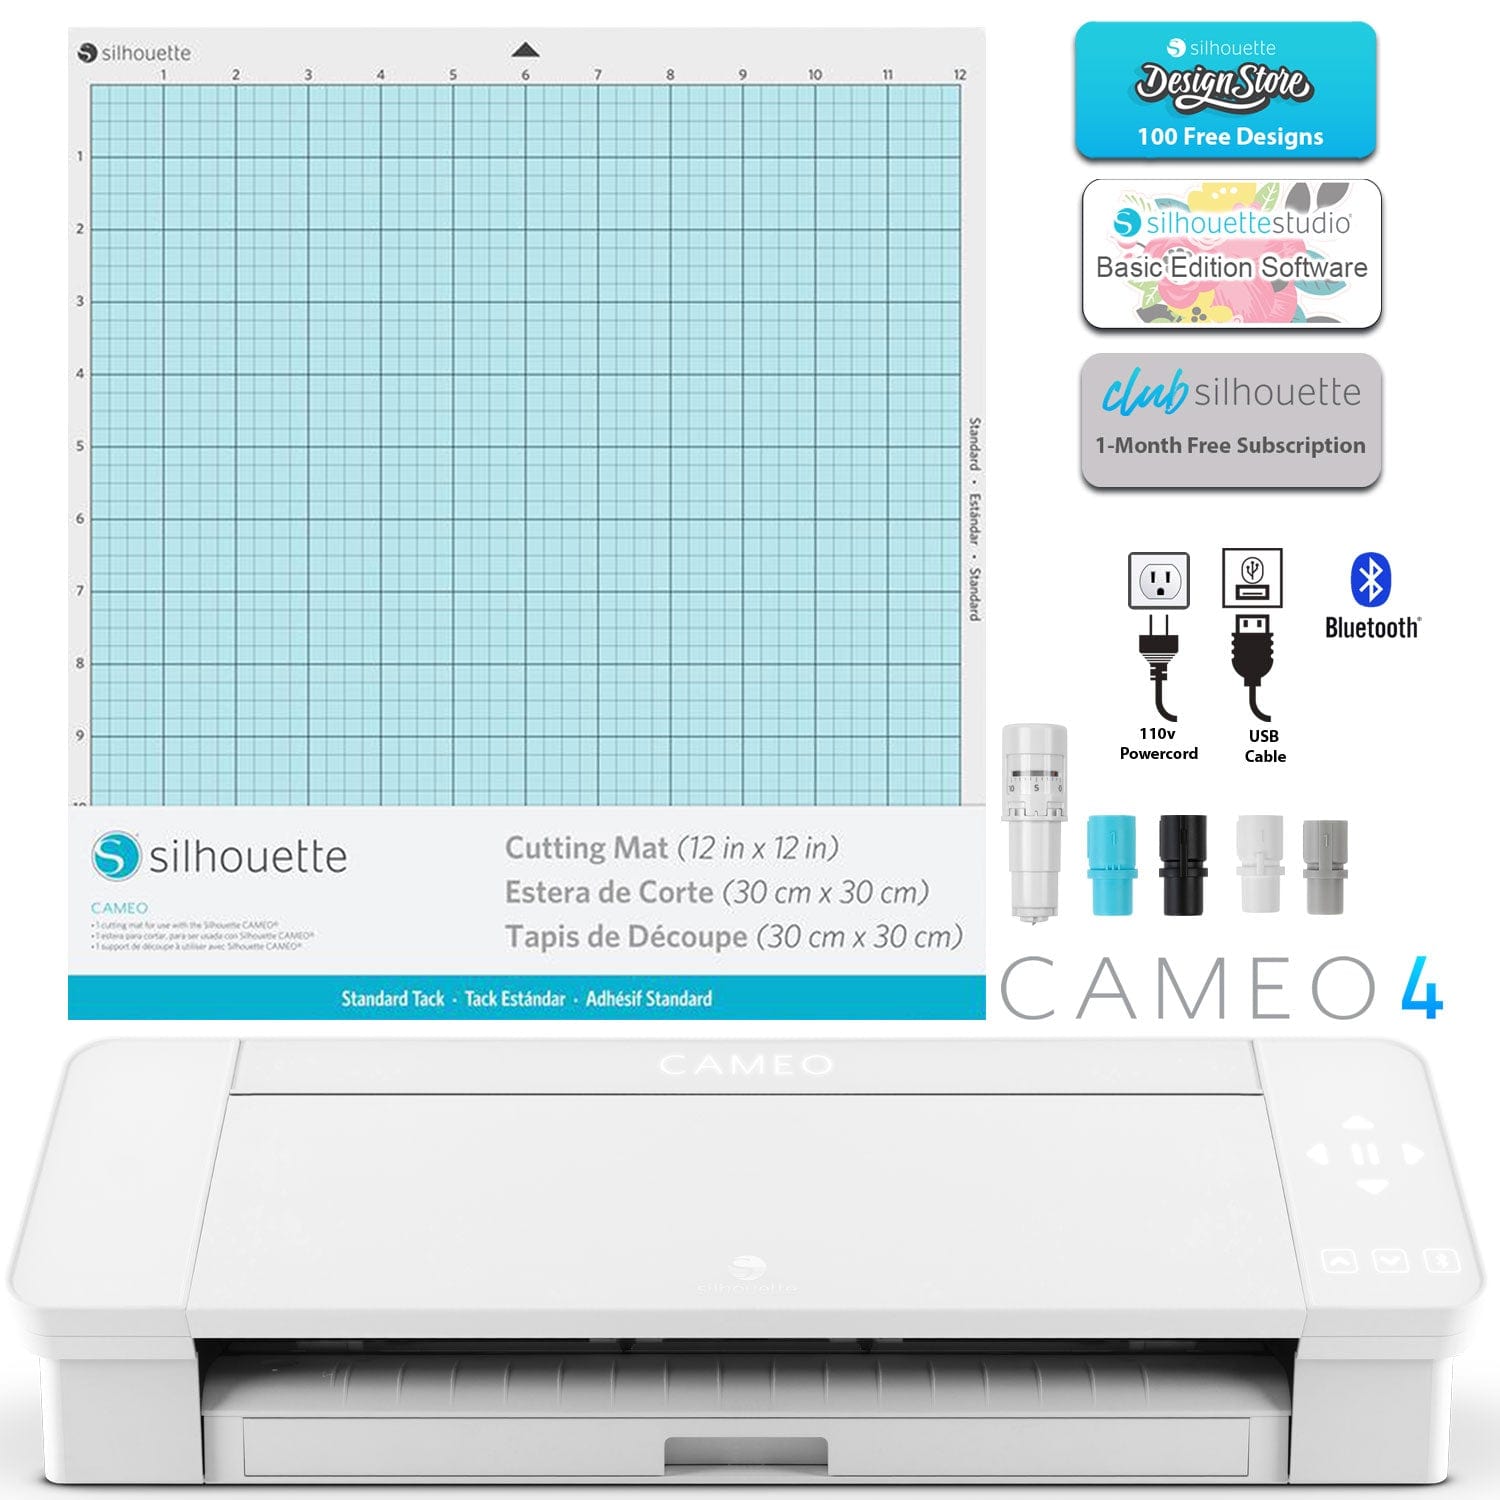 Silhouette America Craft Cutters & Embossers Silhouette Cameo 4 Bundle Mat N Bladed- AUTO, Rotary, Kraft , Deep Cut, and Premium Blades, plus PixScan , Light, and Standard Hold Mats